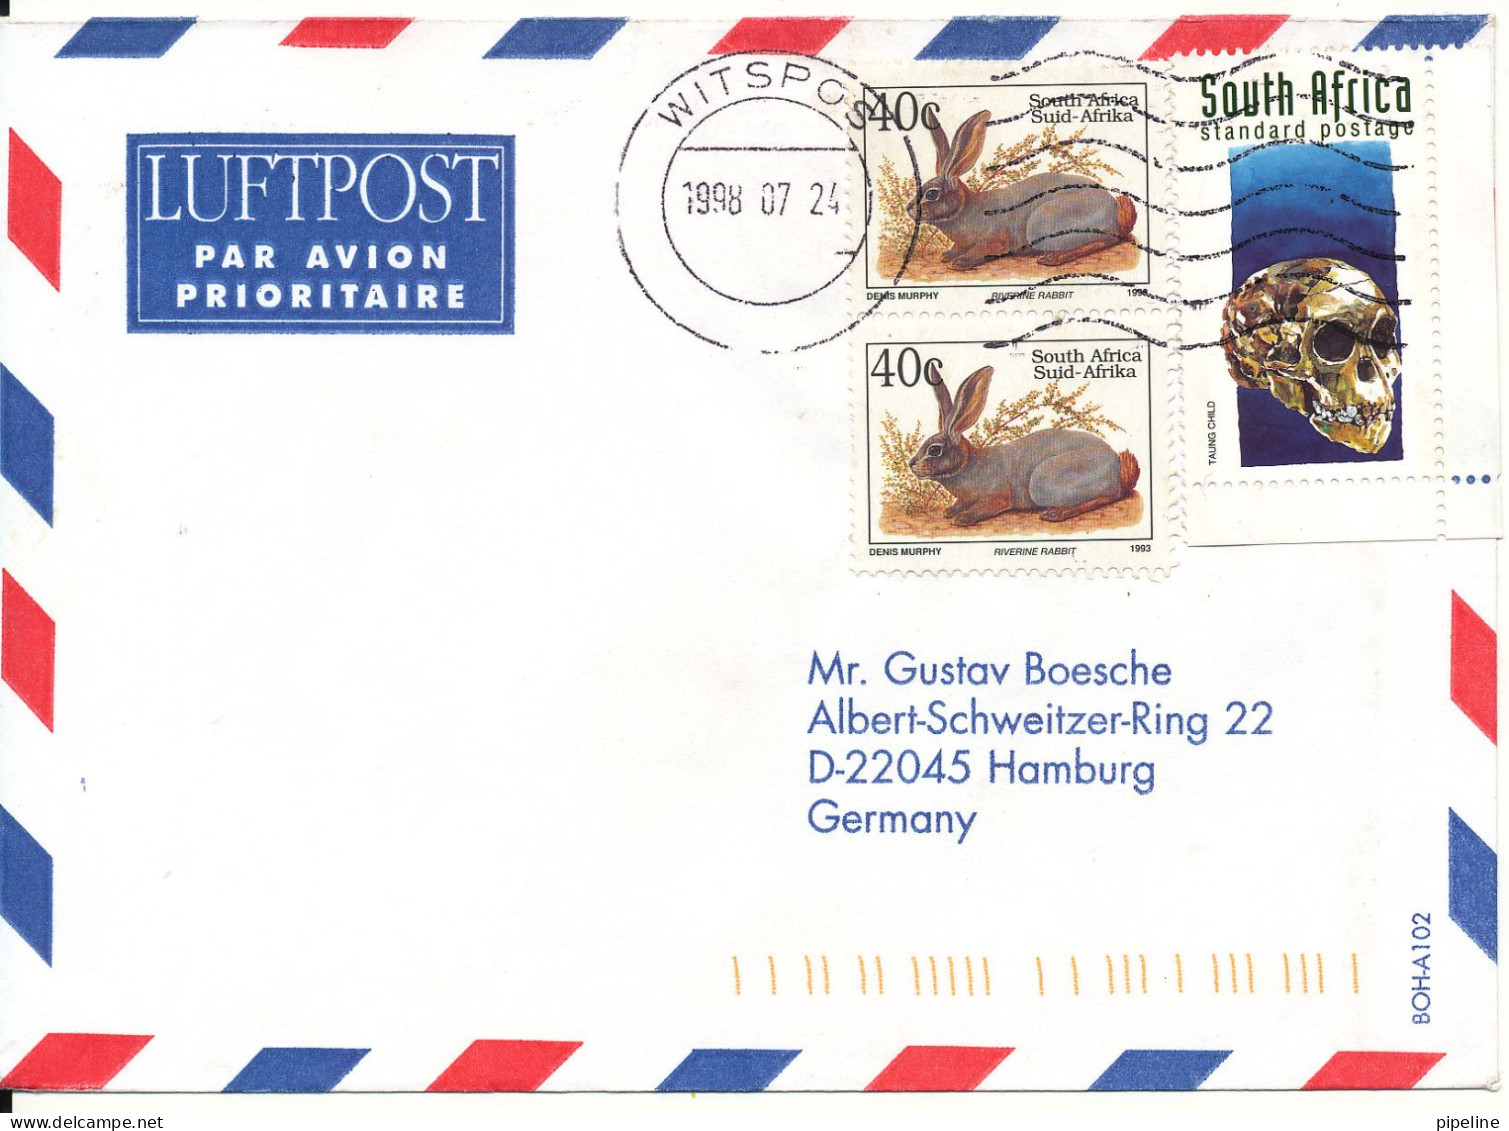 South Africa Air Mail Cover Sent To Germany 24-7-1998 - Luftpost